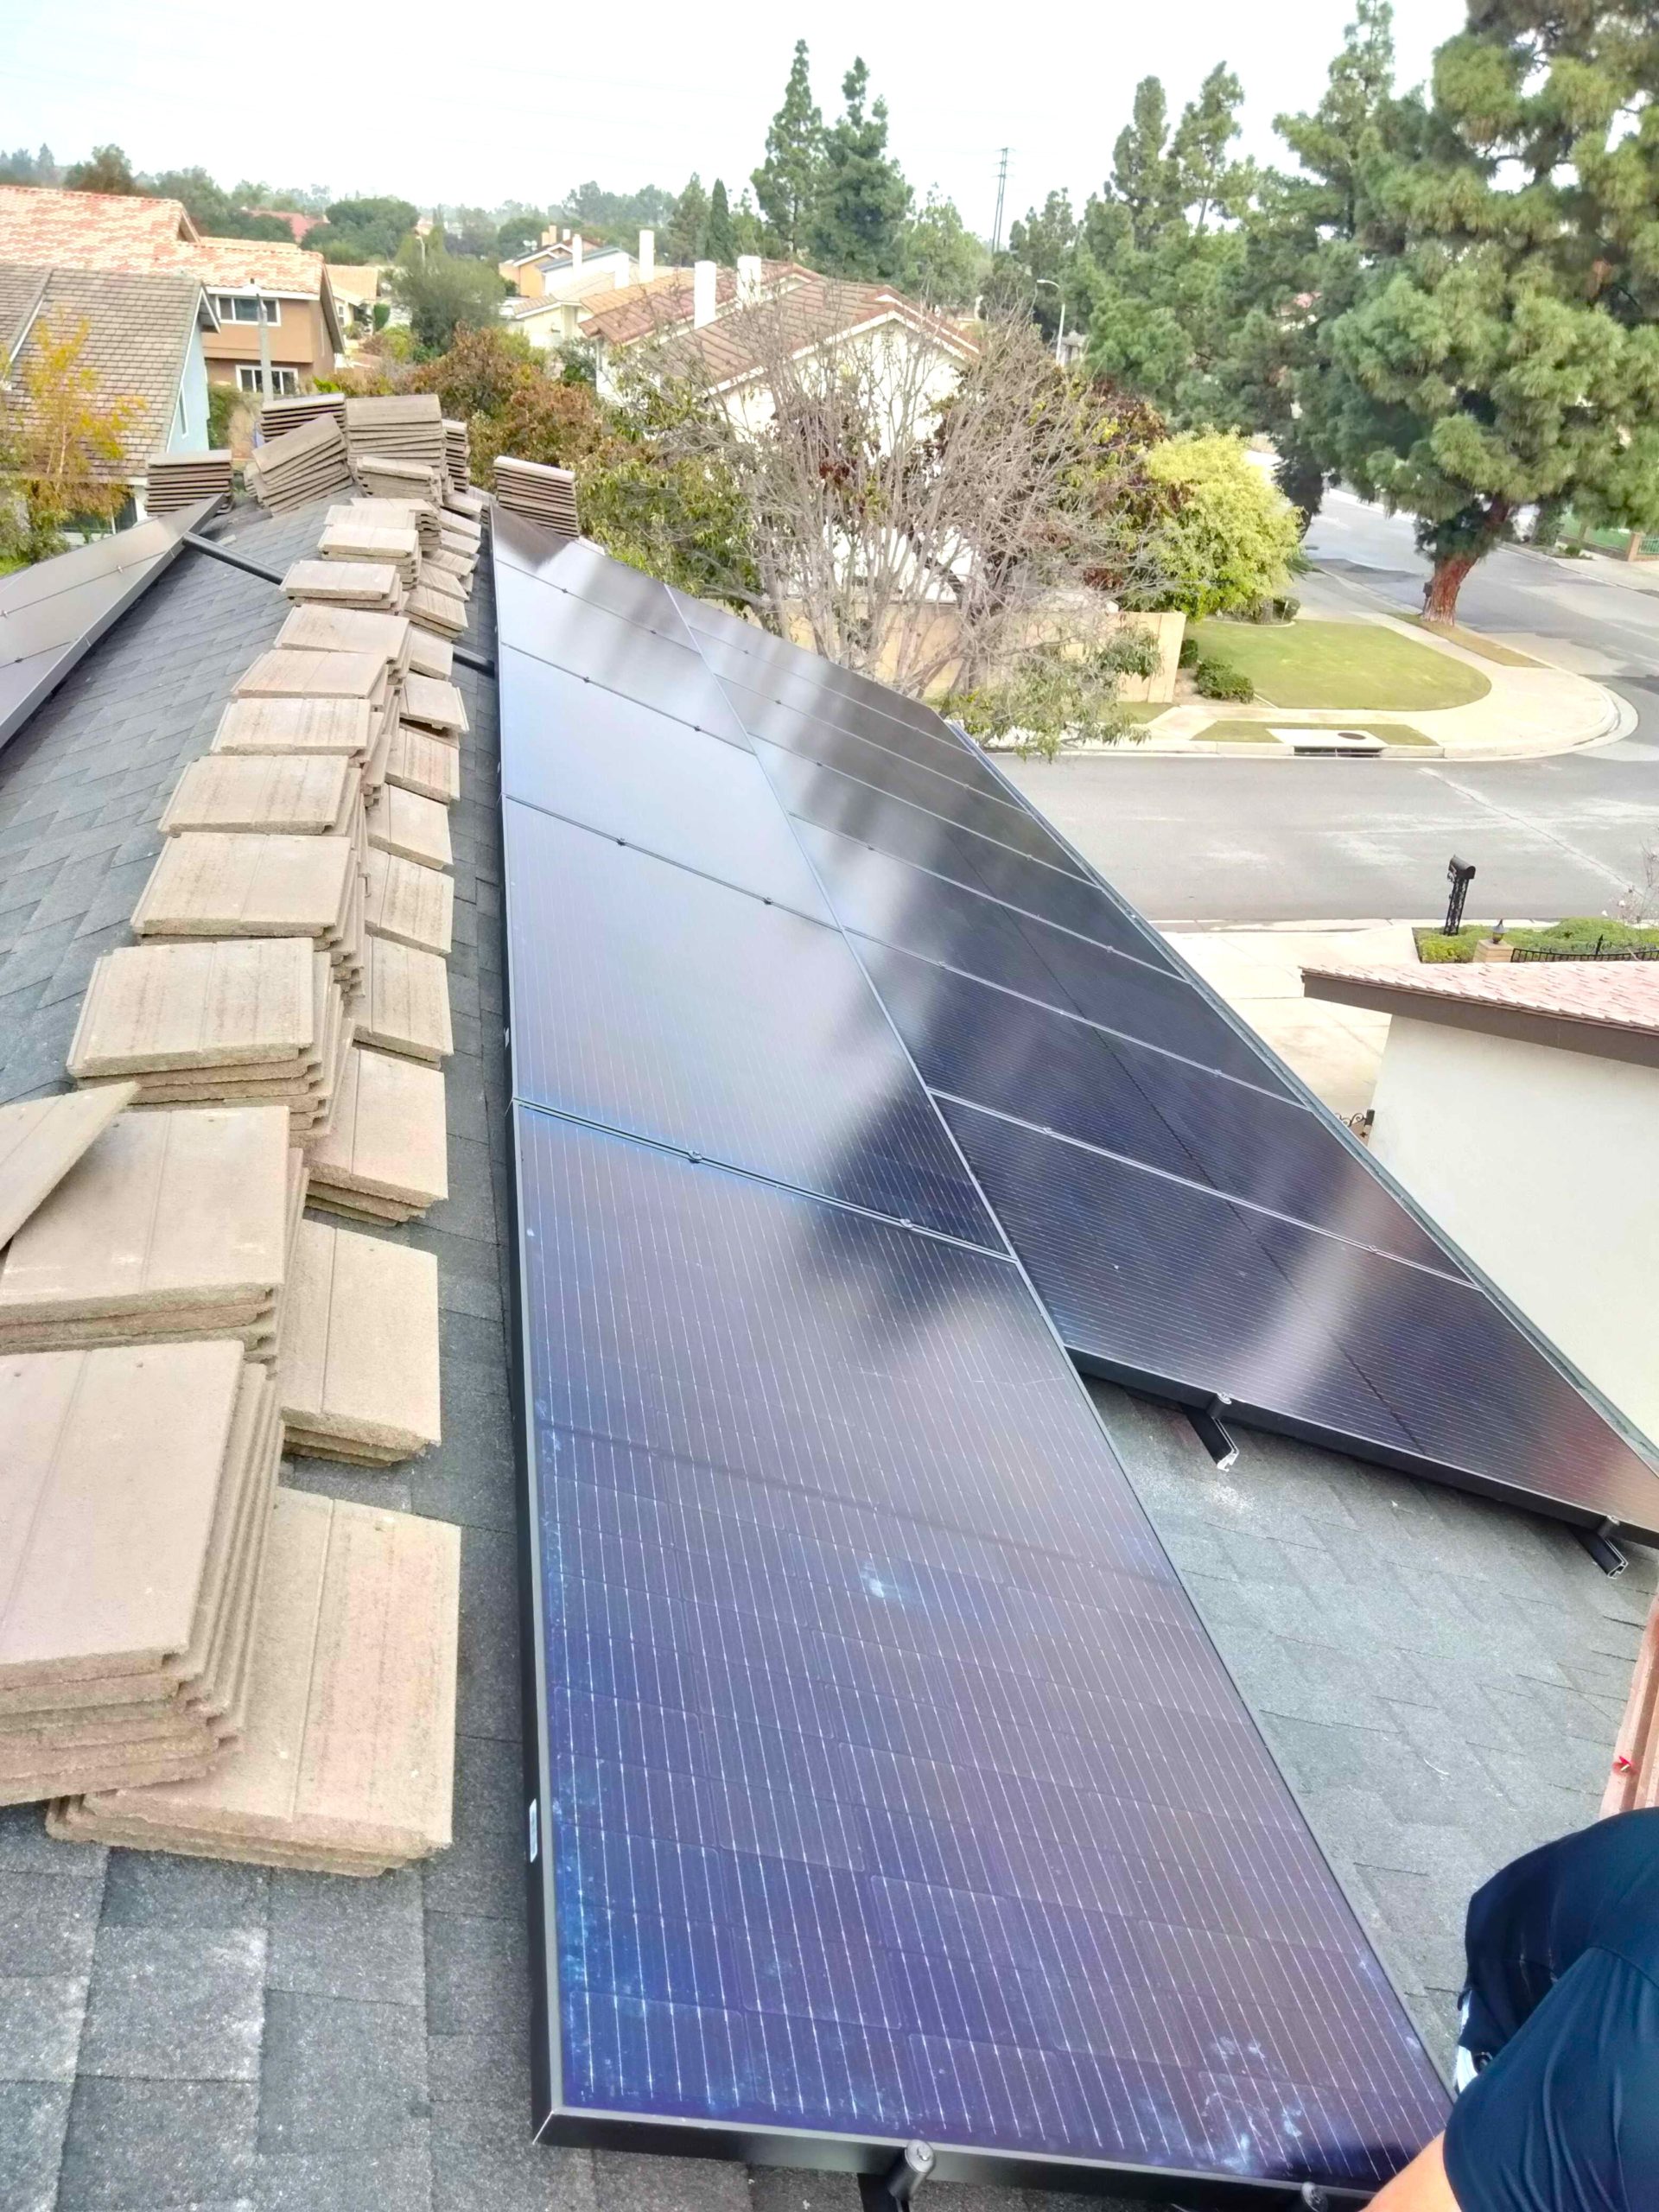 Solar panel system installed on a home's roof.